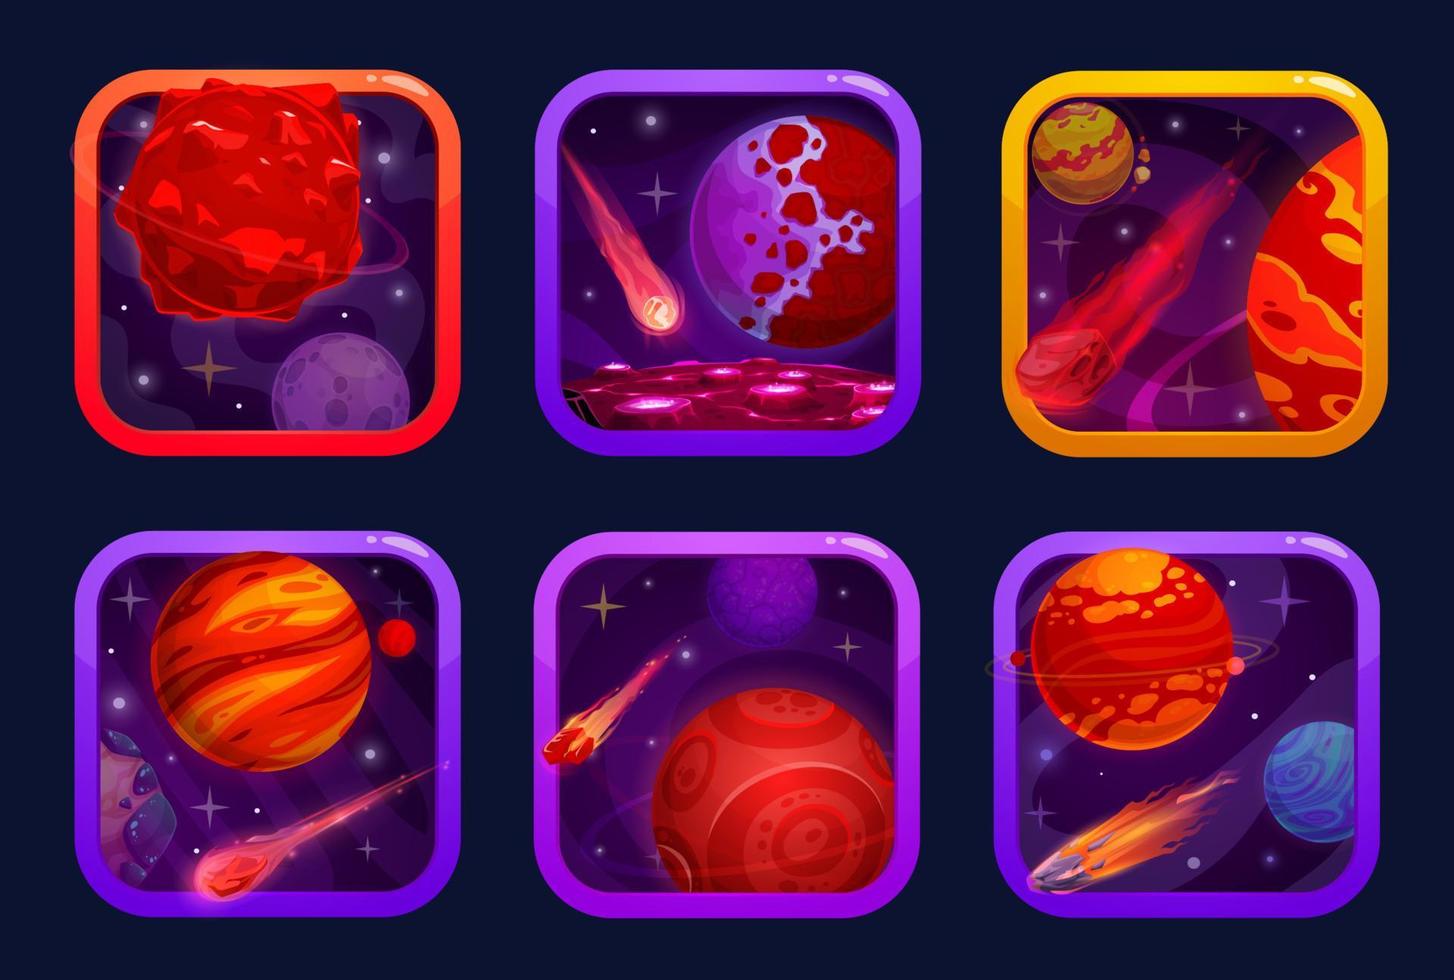 Cartoon space game app icons, comets and planets vector